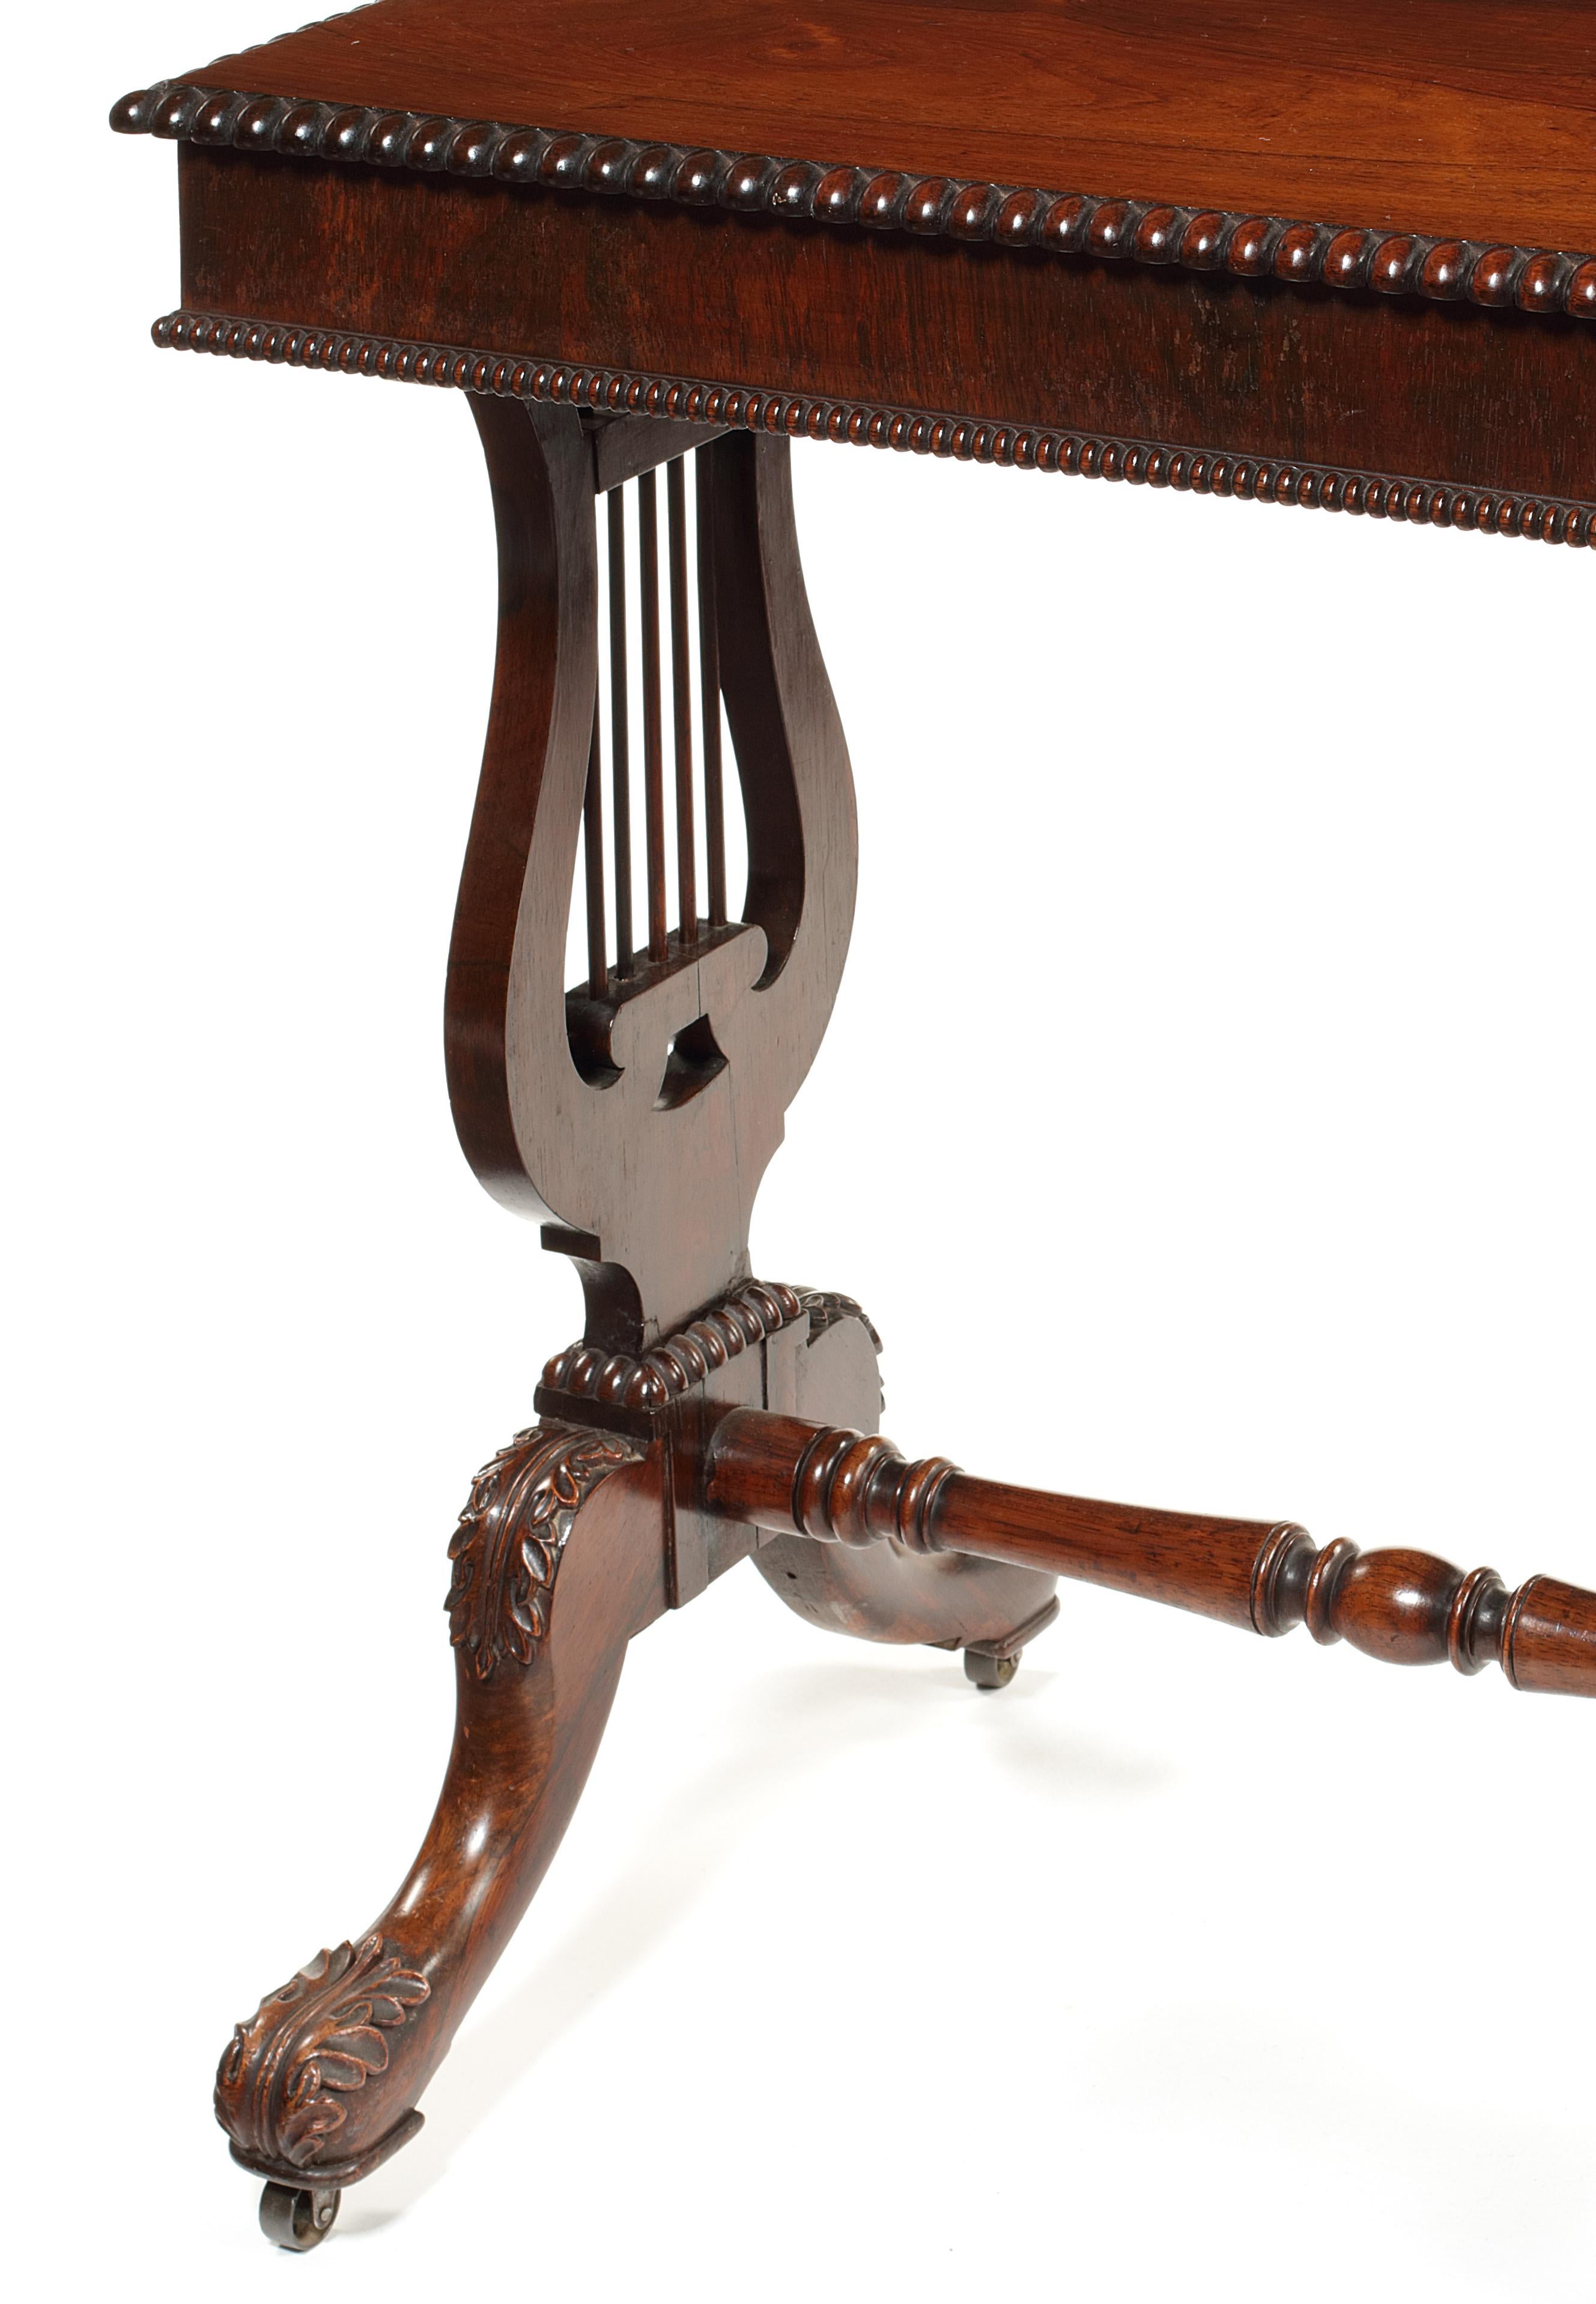 British William IV Rosewood Lyre End Work Table Attributed to Gillows